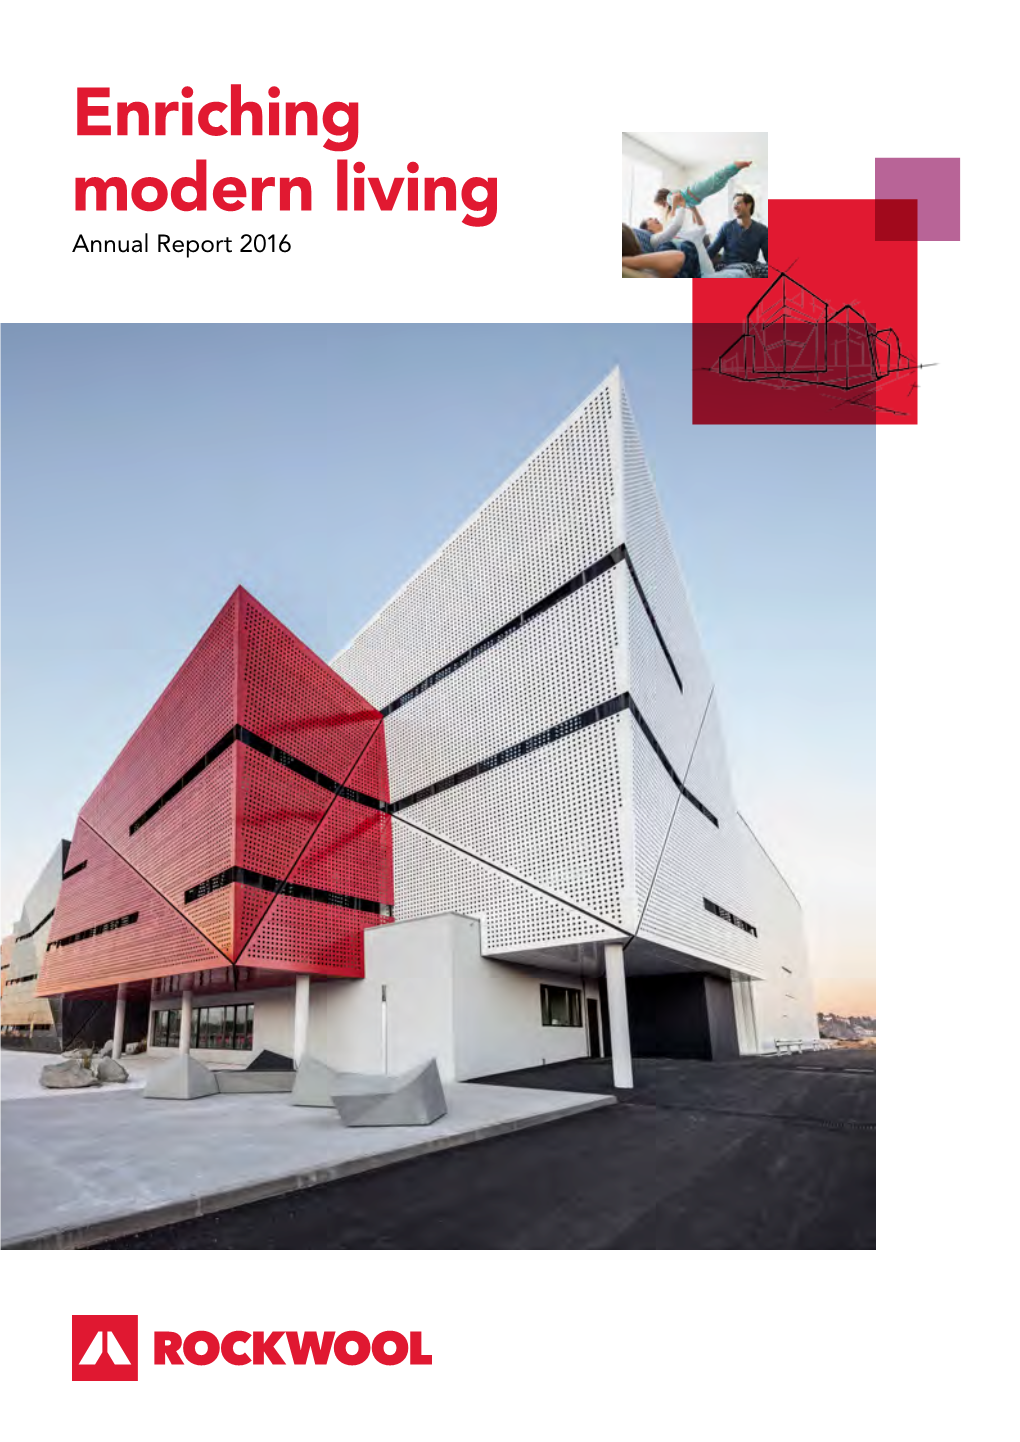 Enriching Modern Living Annual Report 2016 Overview Enriching Modern Living Overview